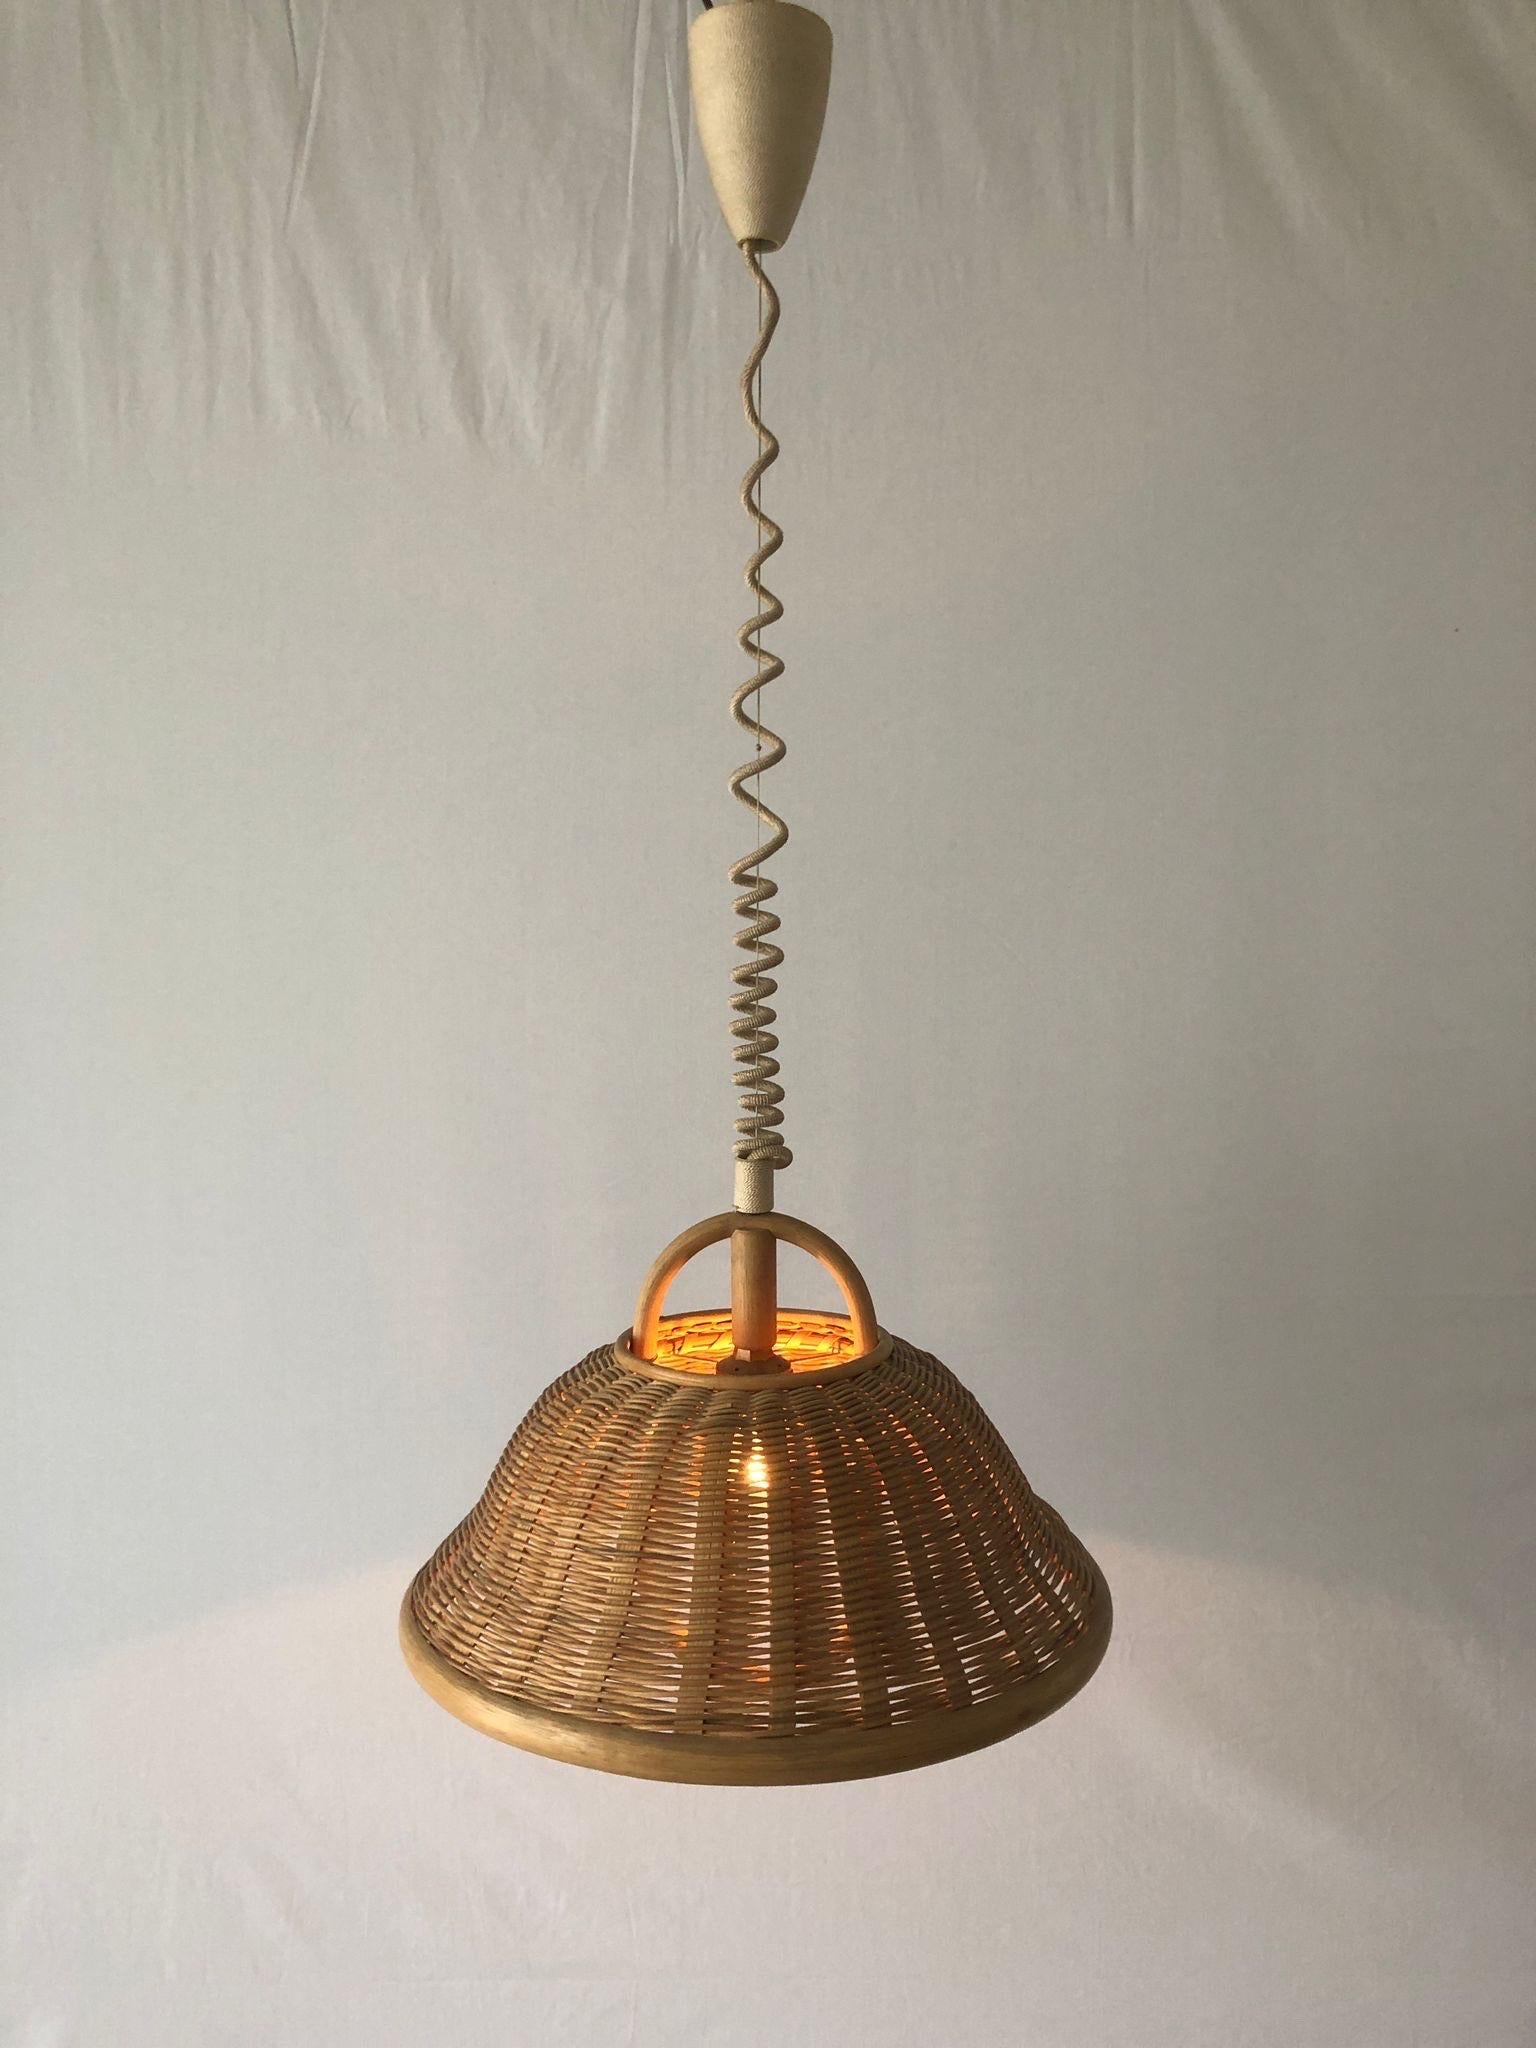 Large Wicker Adjustable Shade Pendant Lamp, 1960s, Germany For Sale 4